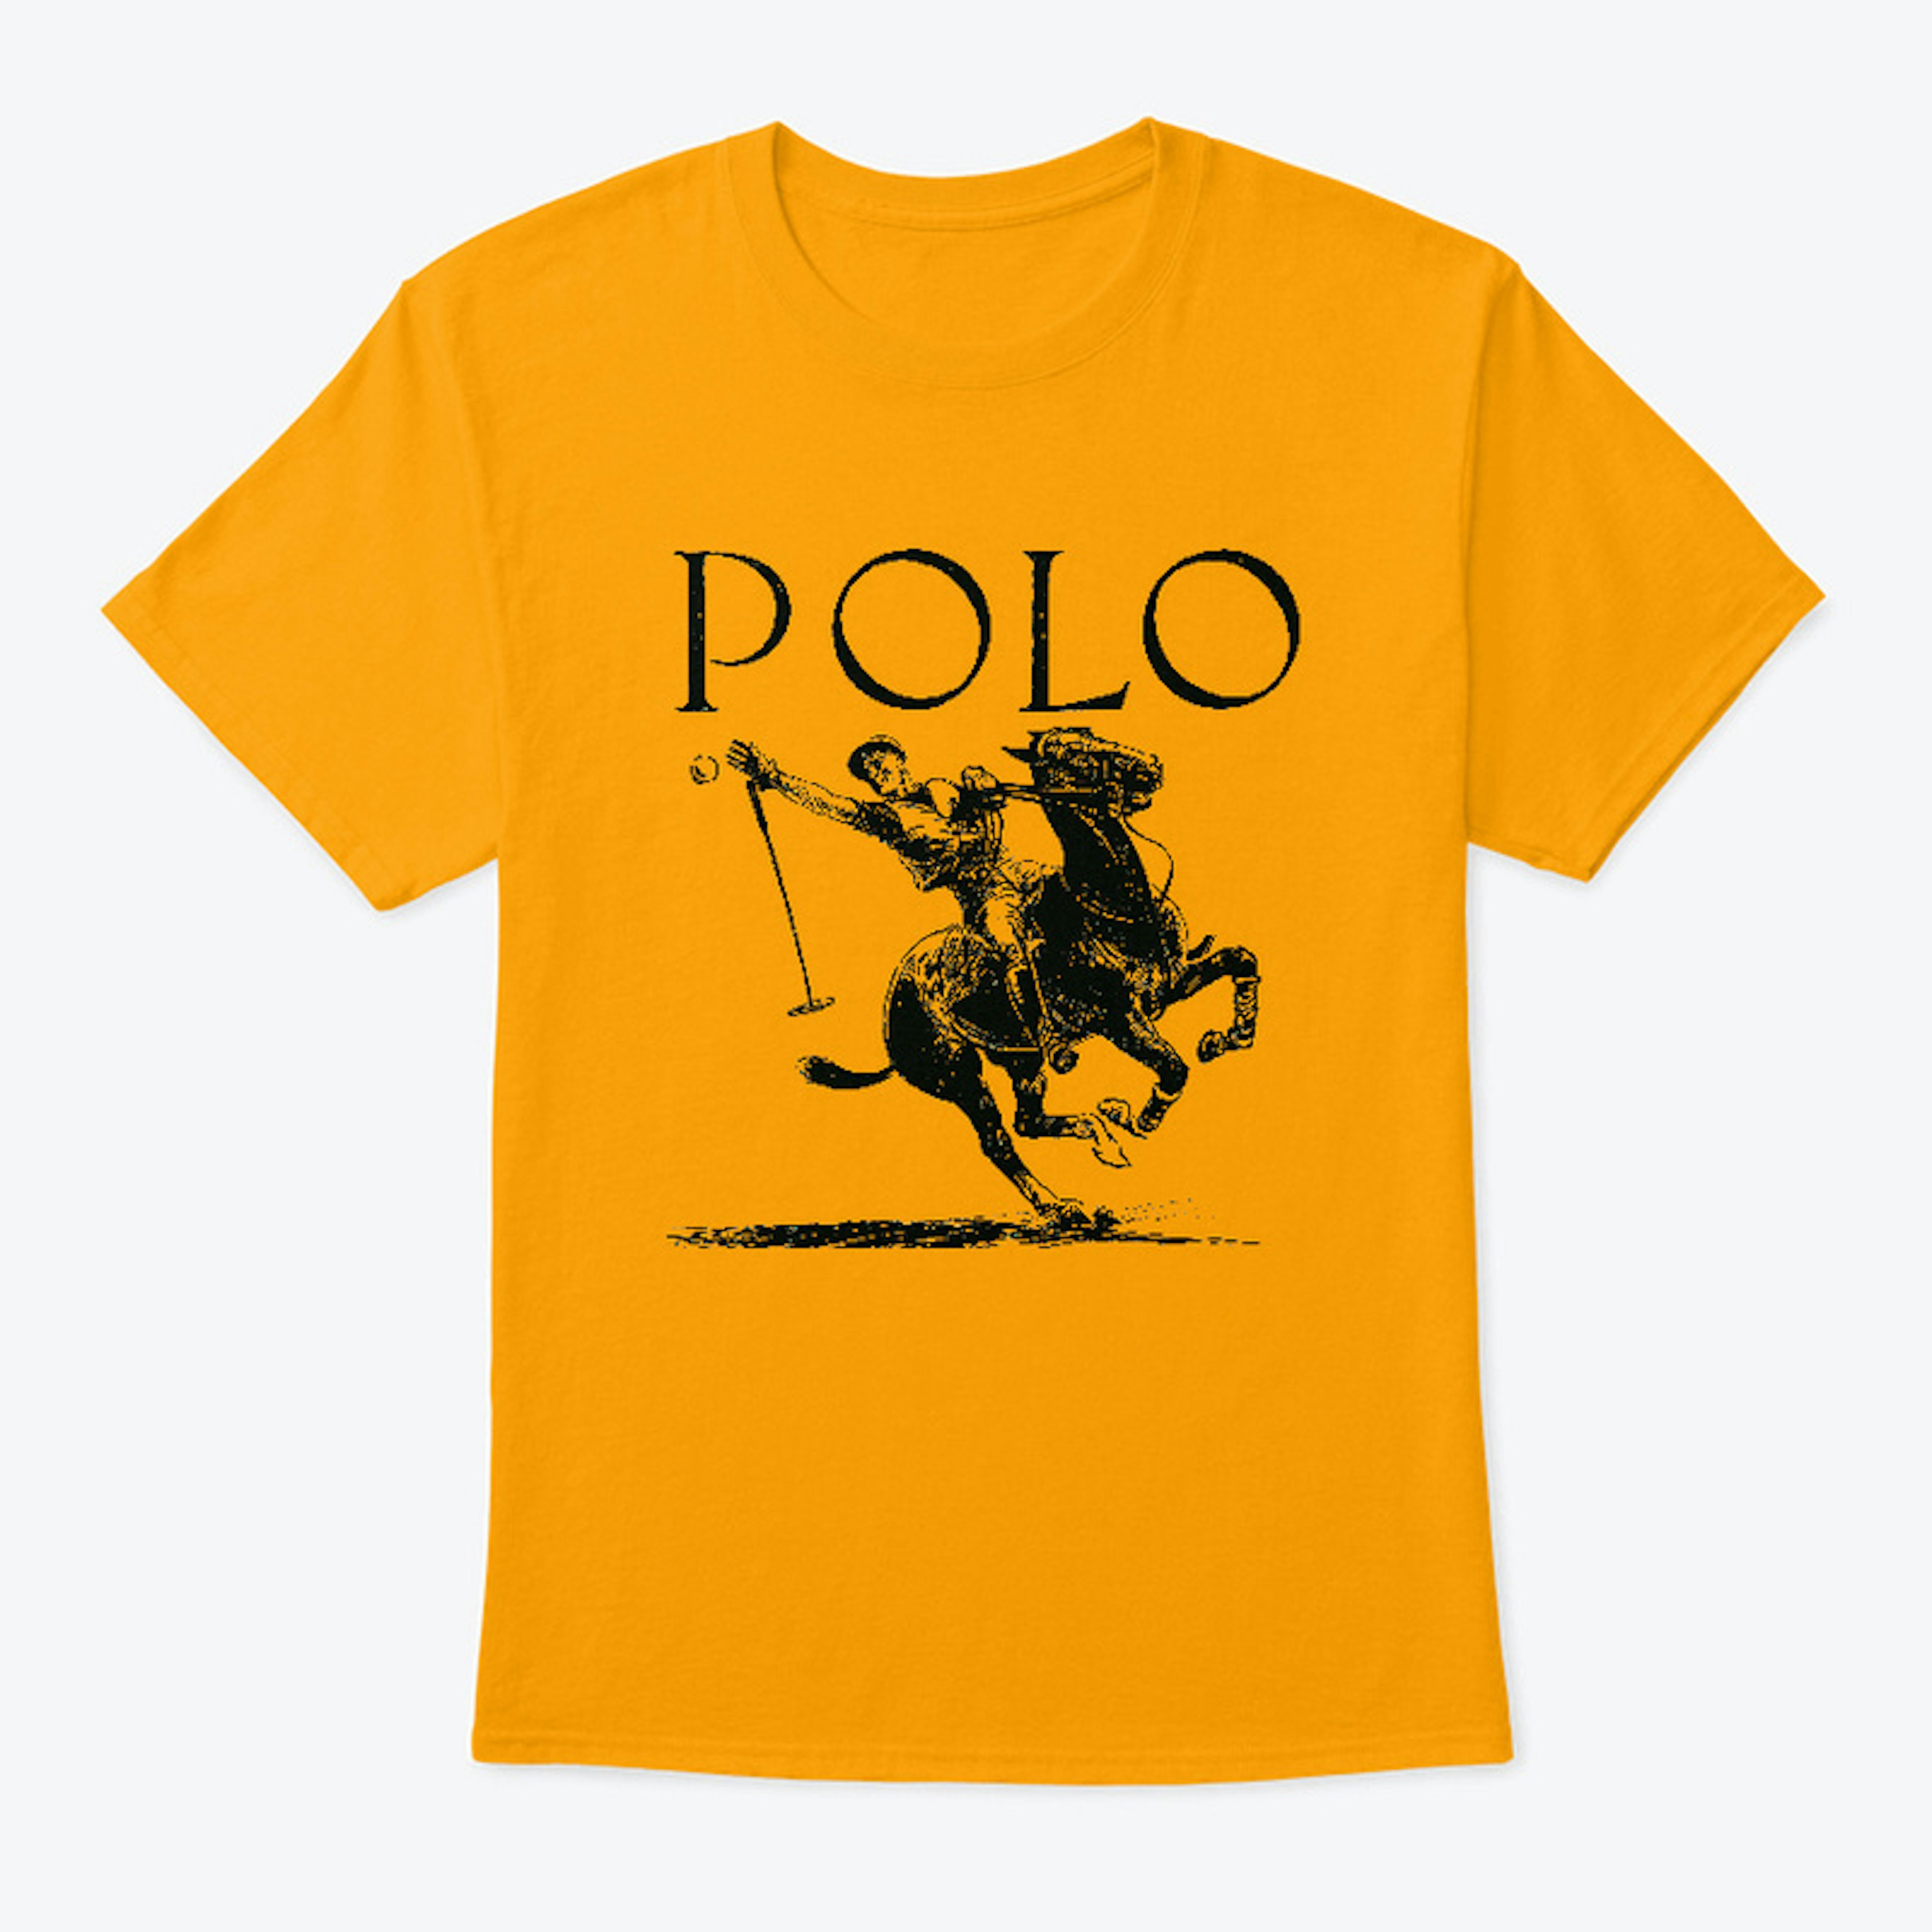 Polo: the sport for winners